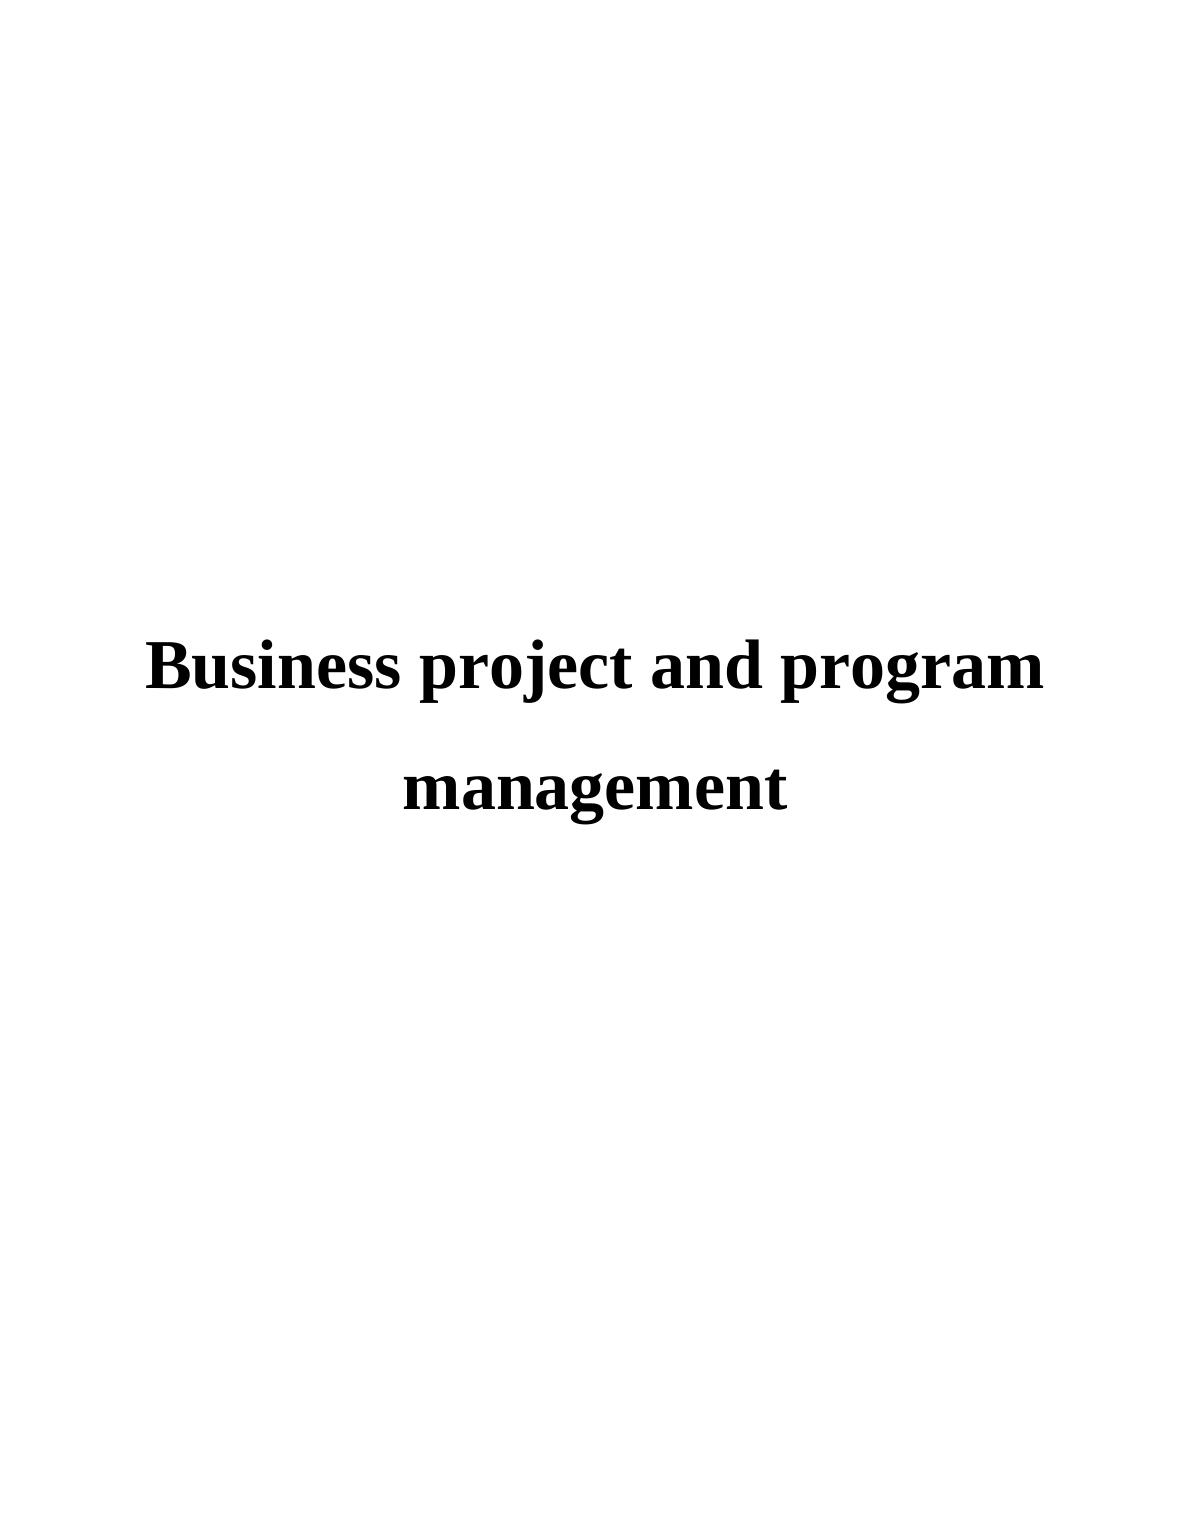 Business Project and Program Management_1